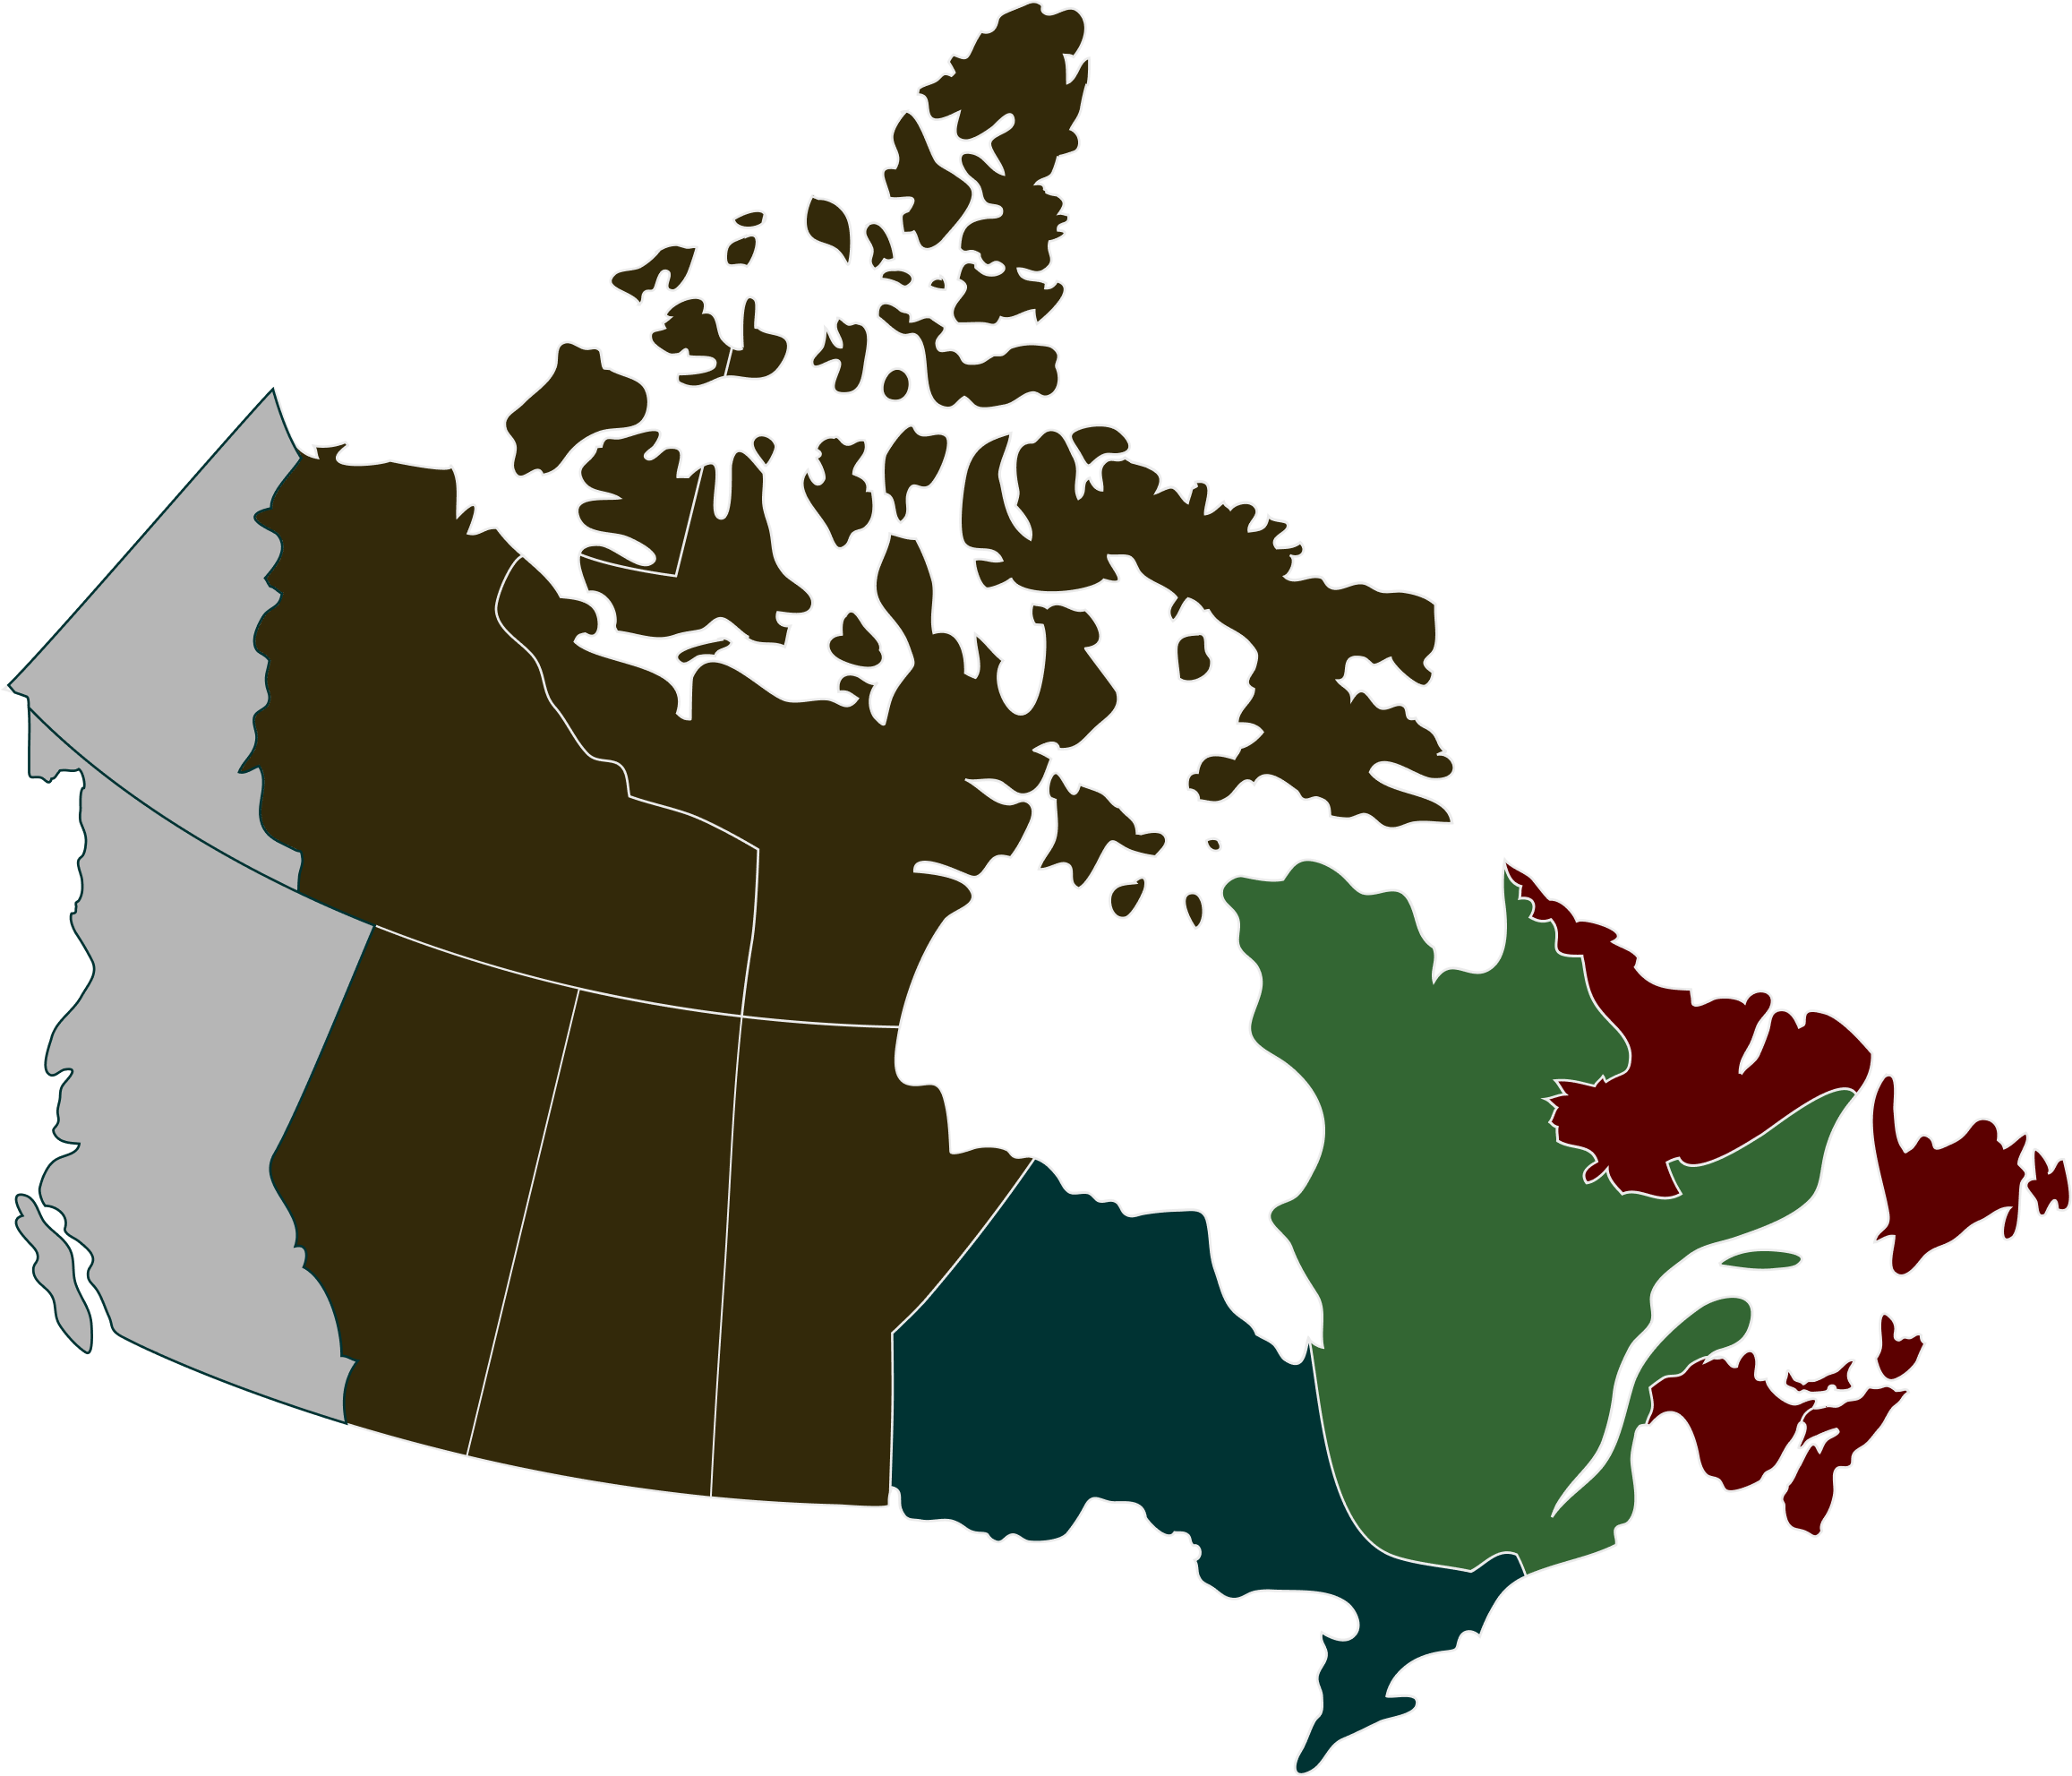 Map of Canada